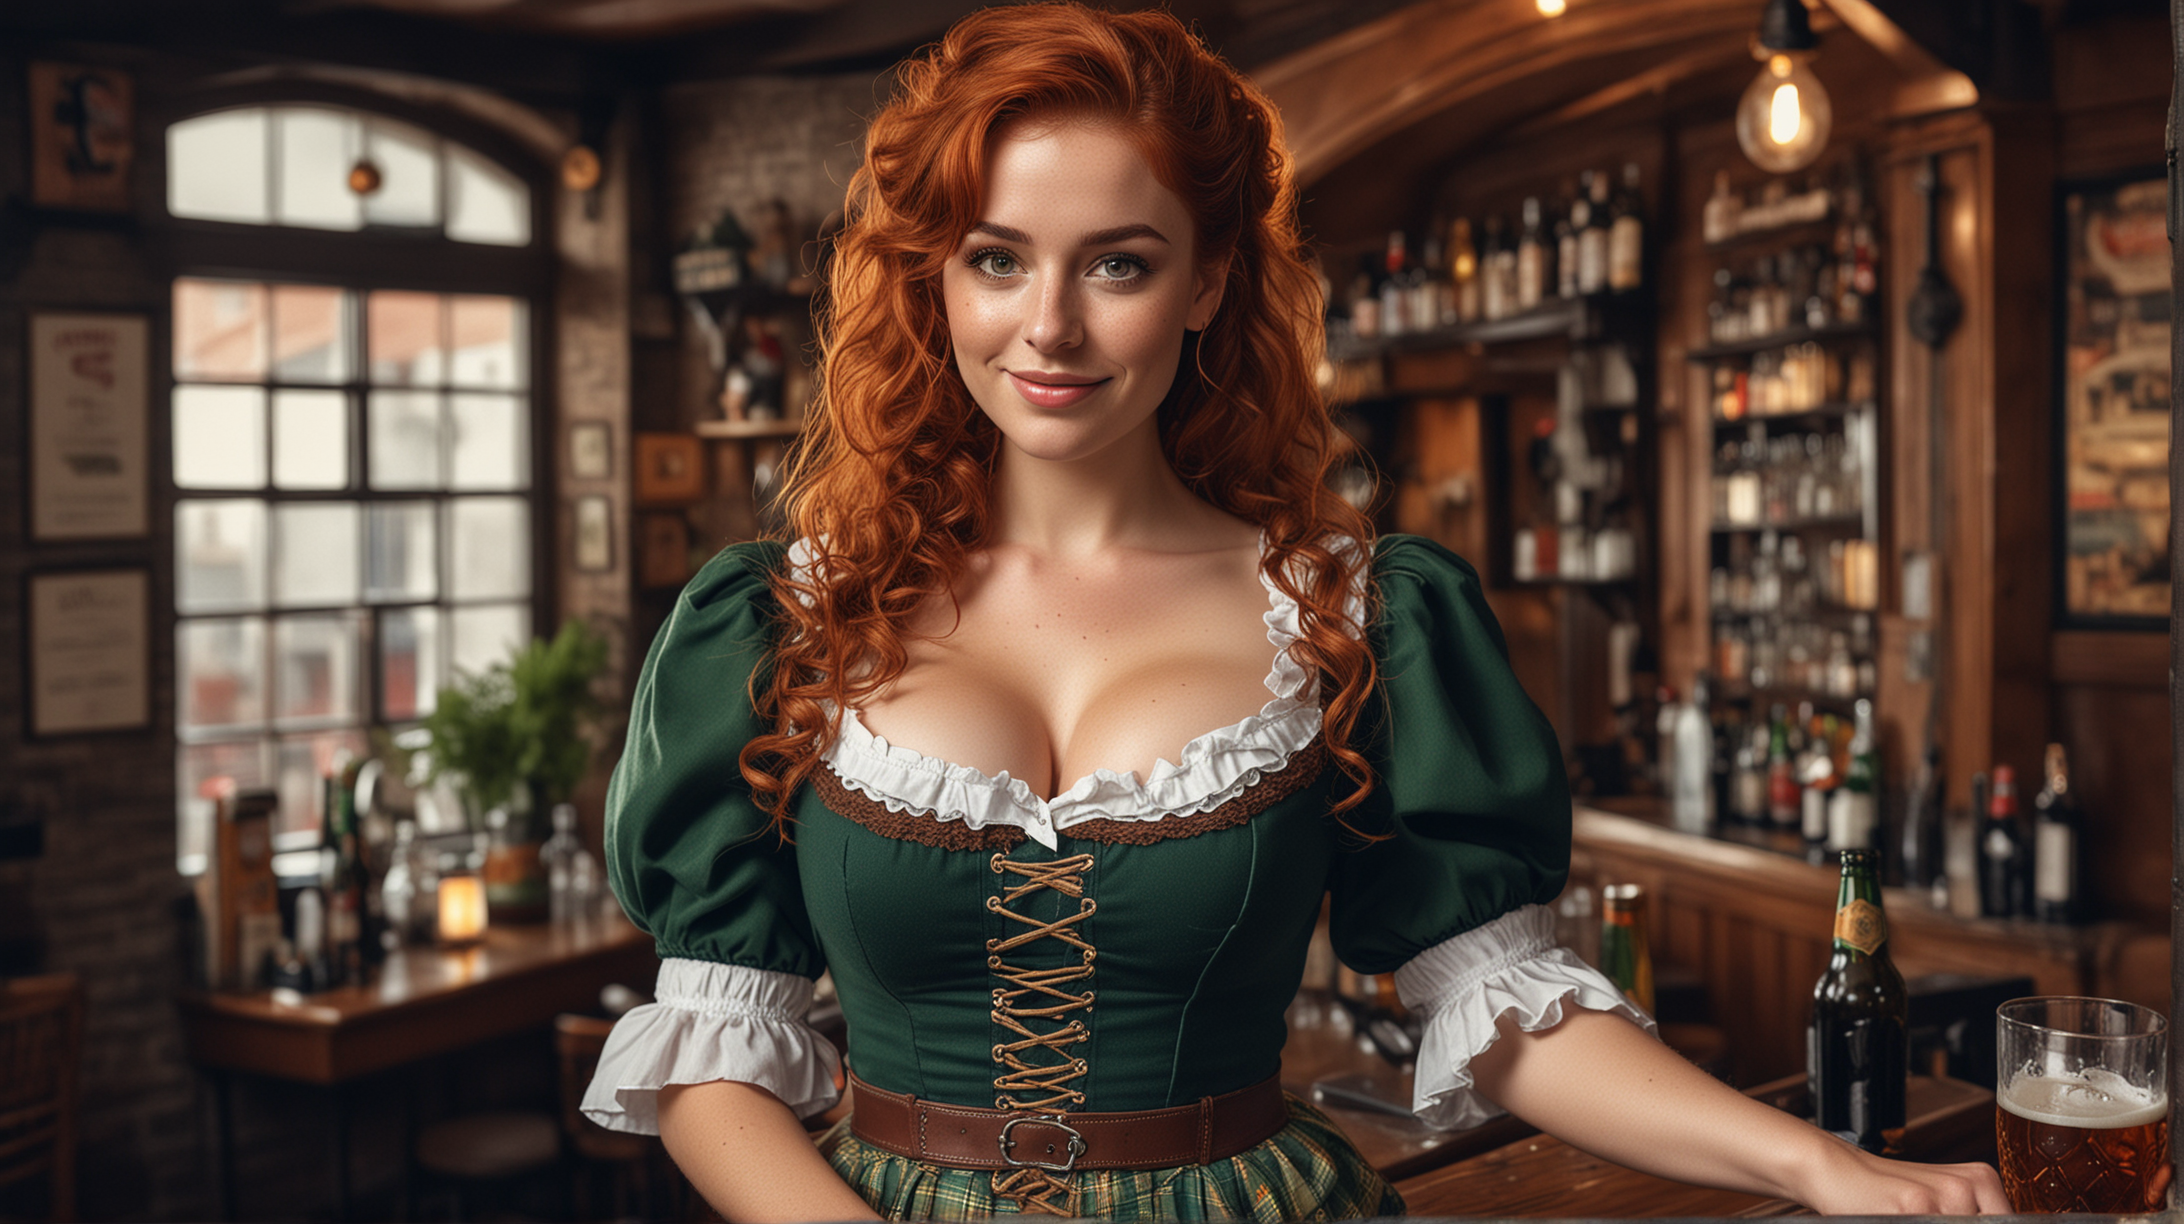 Stunning RedHaired Irish Woman in Green Oktoberfest Costume at Authentic Pub